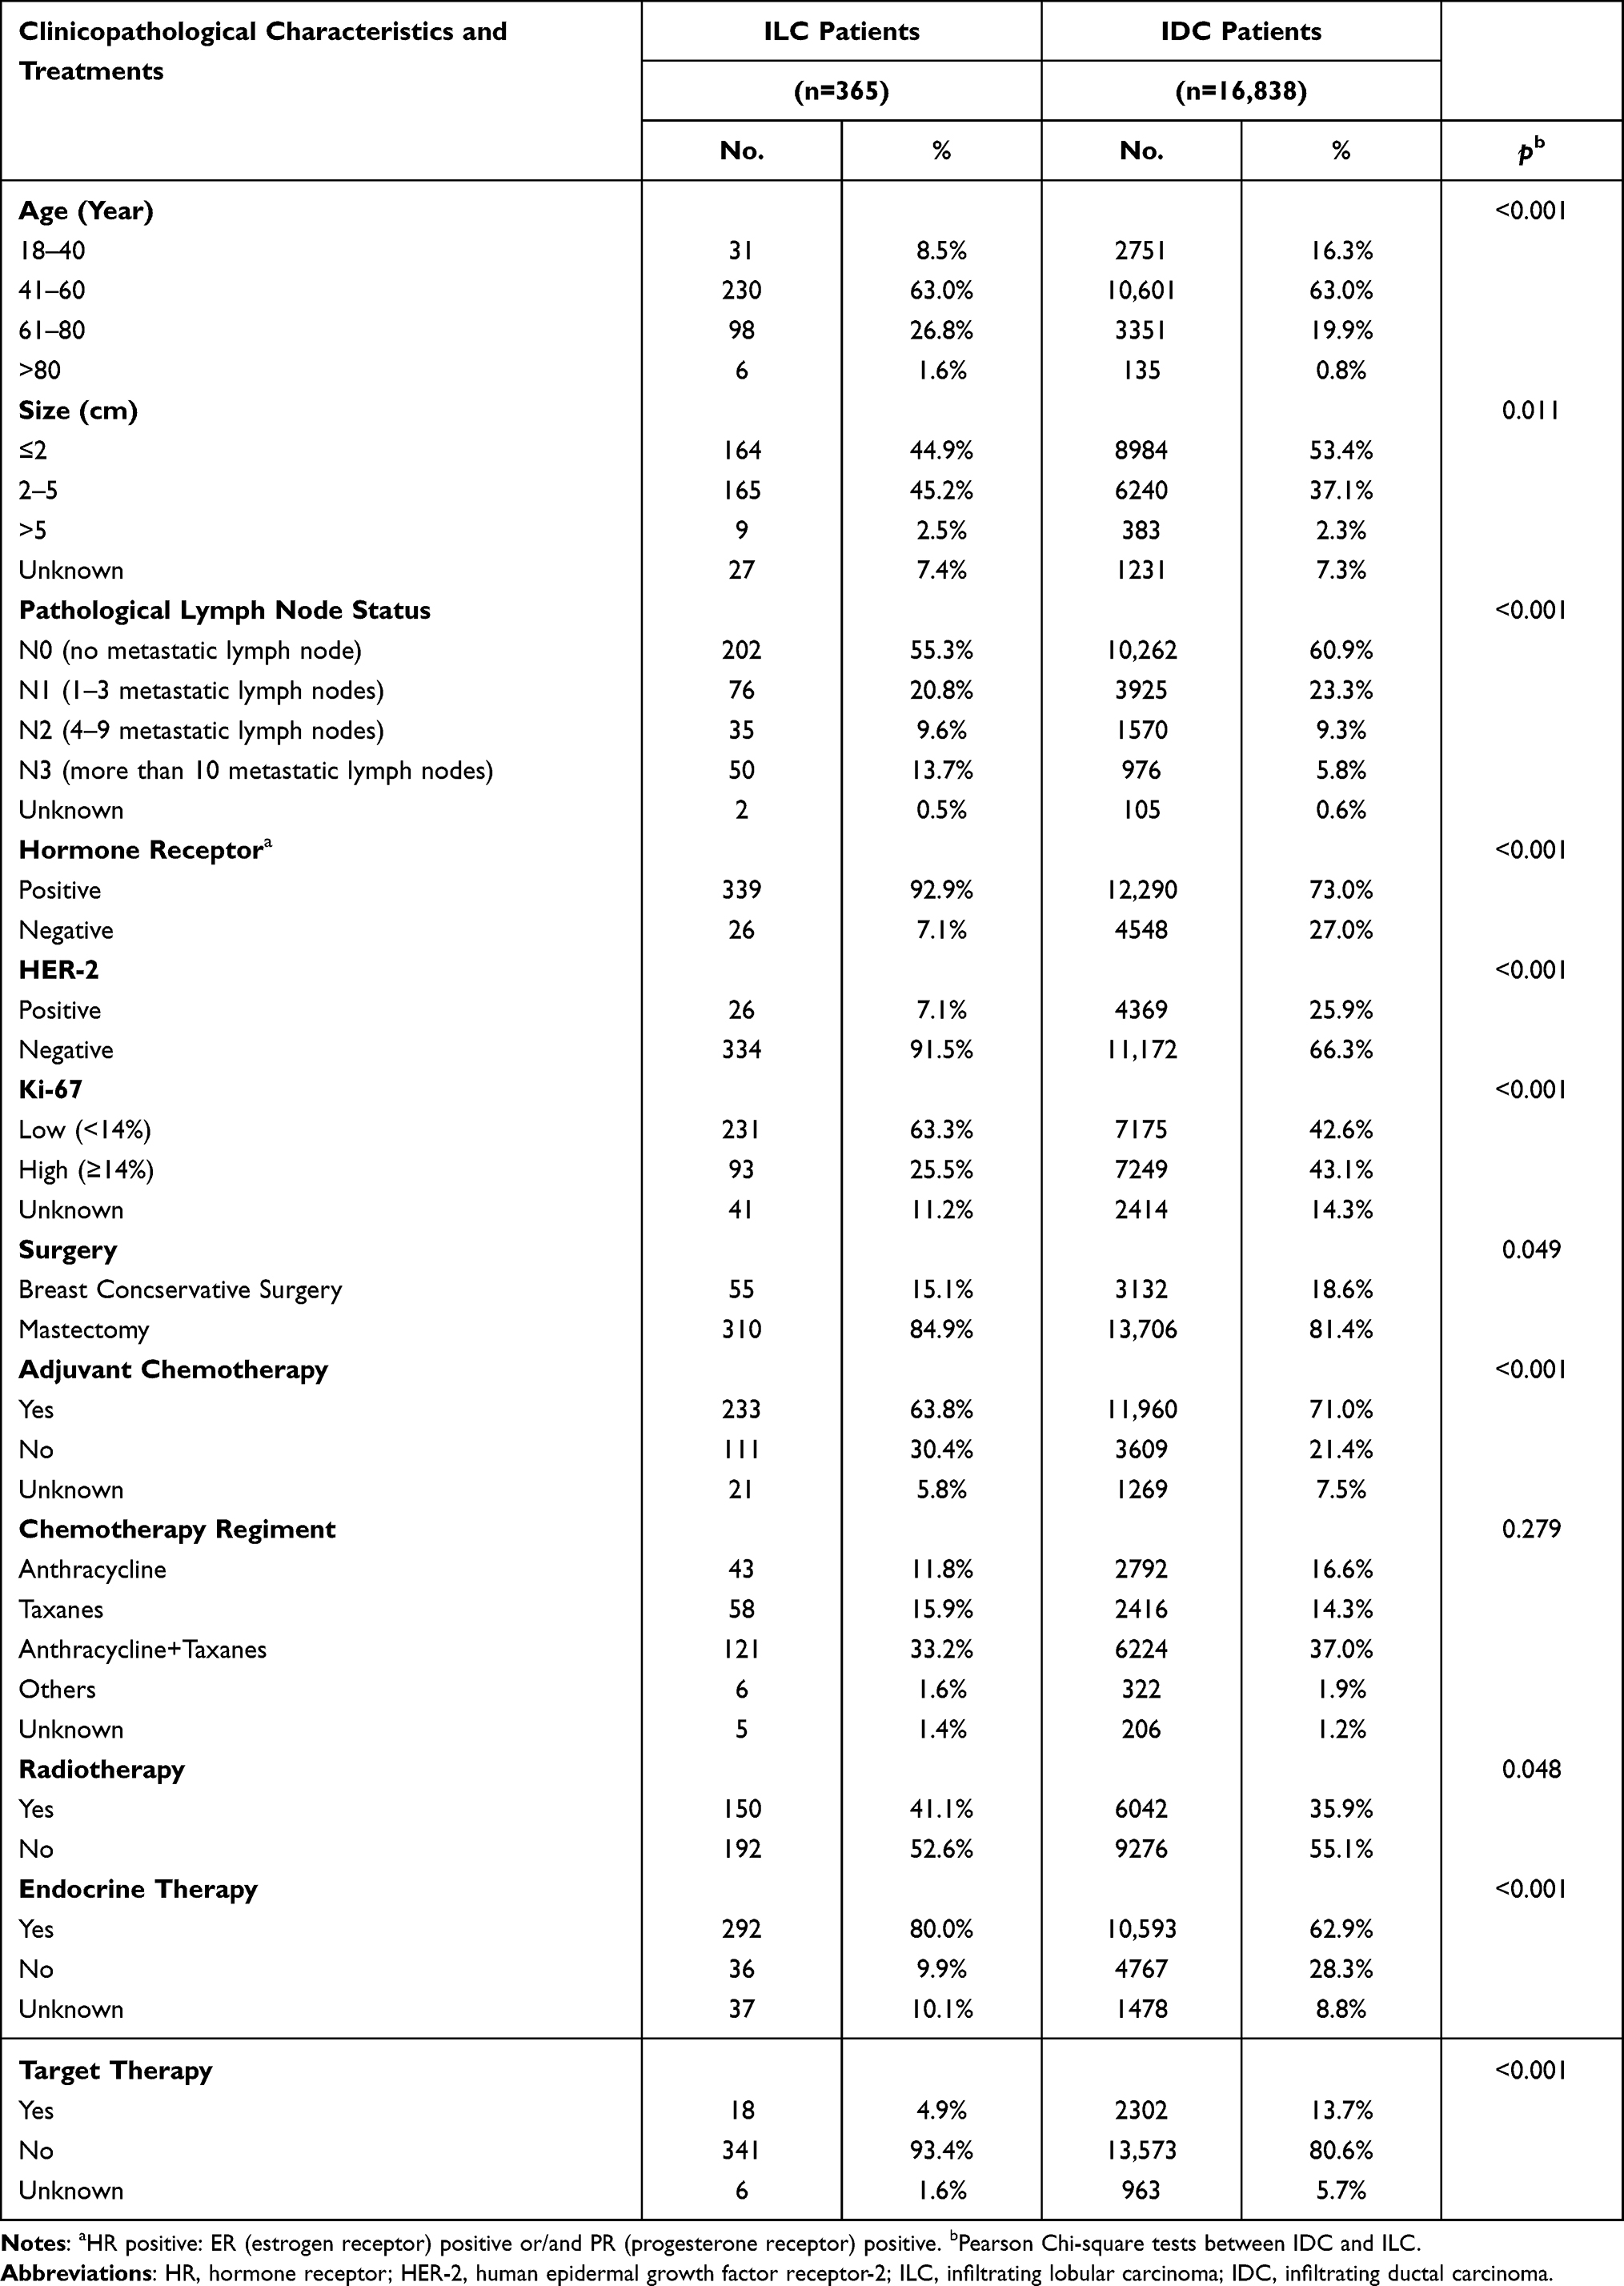 Clinicopathological Characteristics and Prognosis of 91 Patients